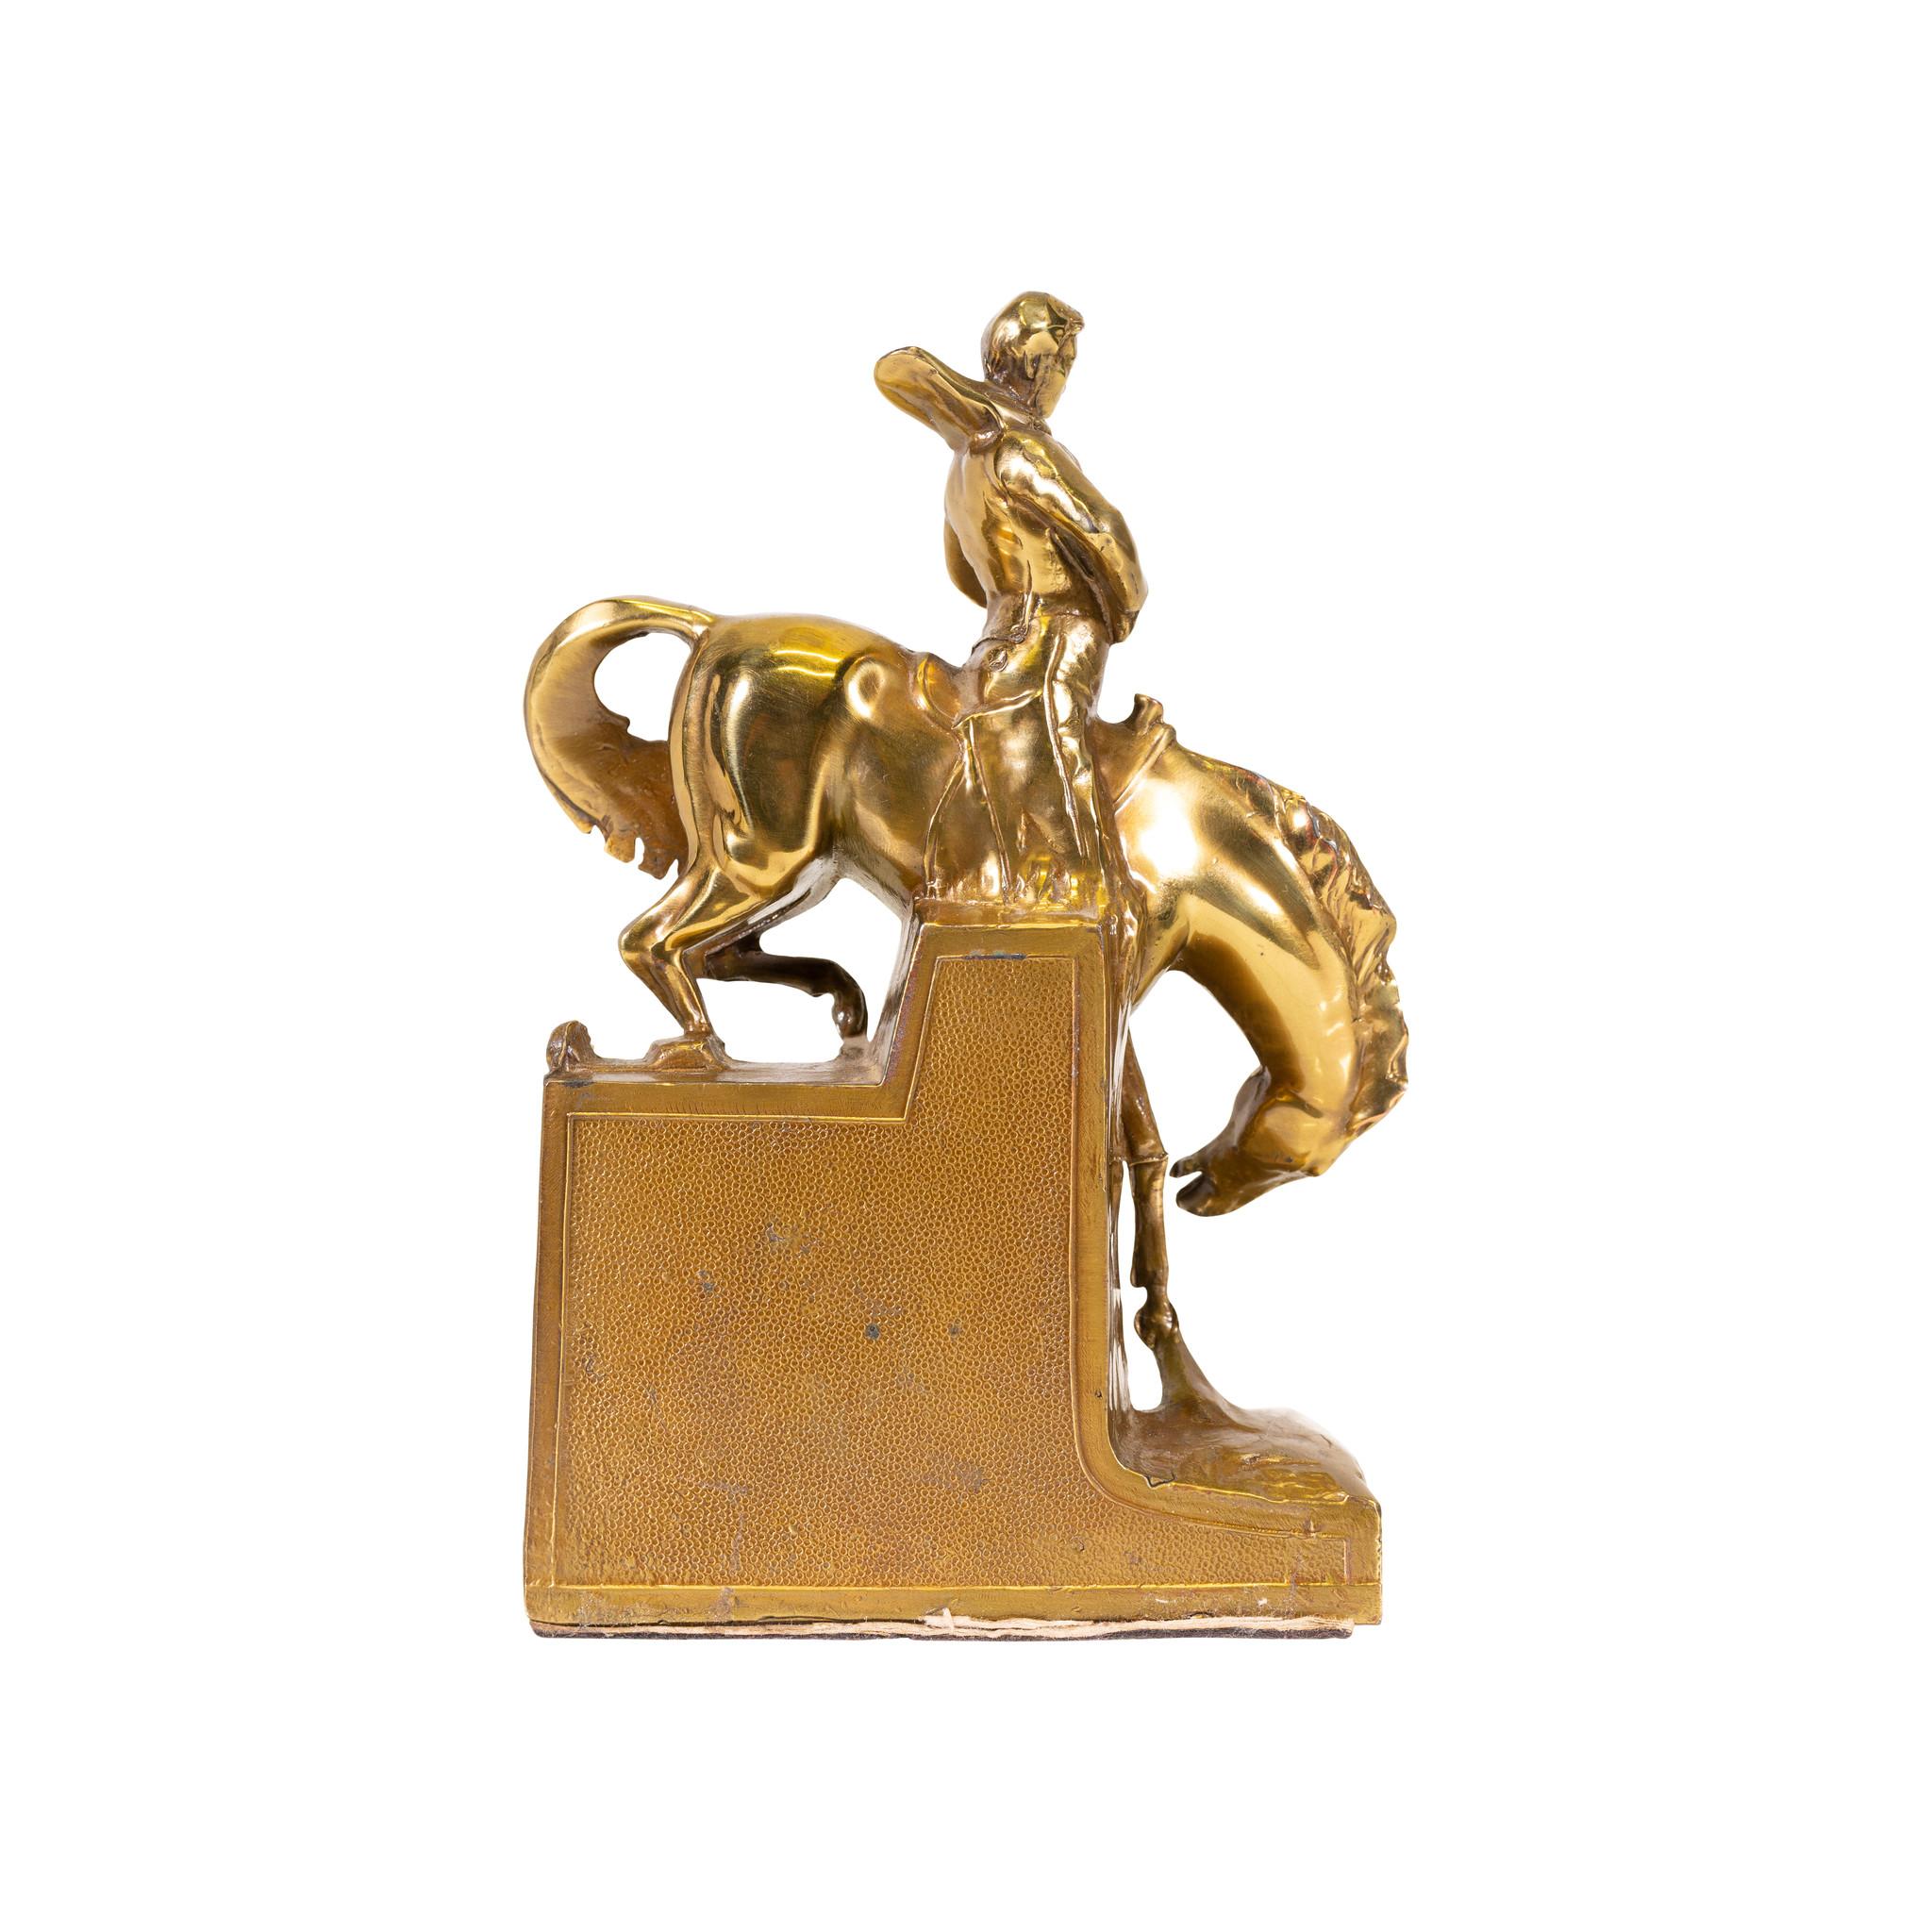 Let 'Er Buck - matched pair of Let 'Er buck bookends. Solid cast bronze with patina finish. Made by PM craftsmen. Cowboys riding bucking horses. Great for any office, bookshelf or western setting.

Origin: United States
Period: First quarter of the